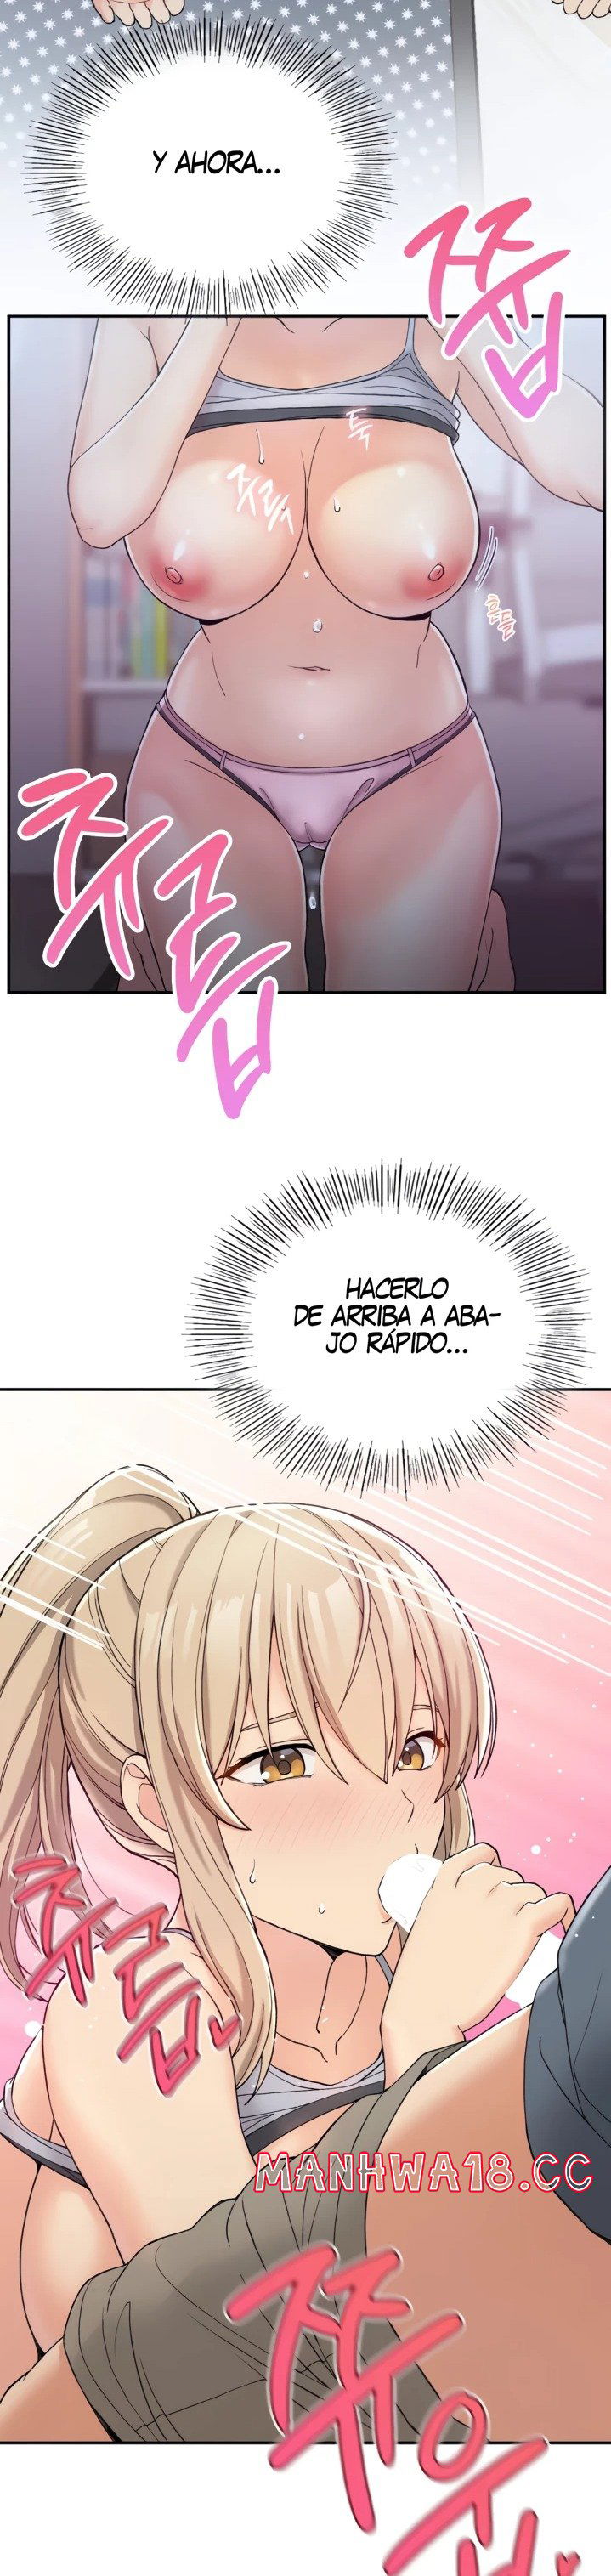 shall-we-live-together-in-the-country-raw-chap-3-34